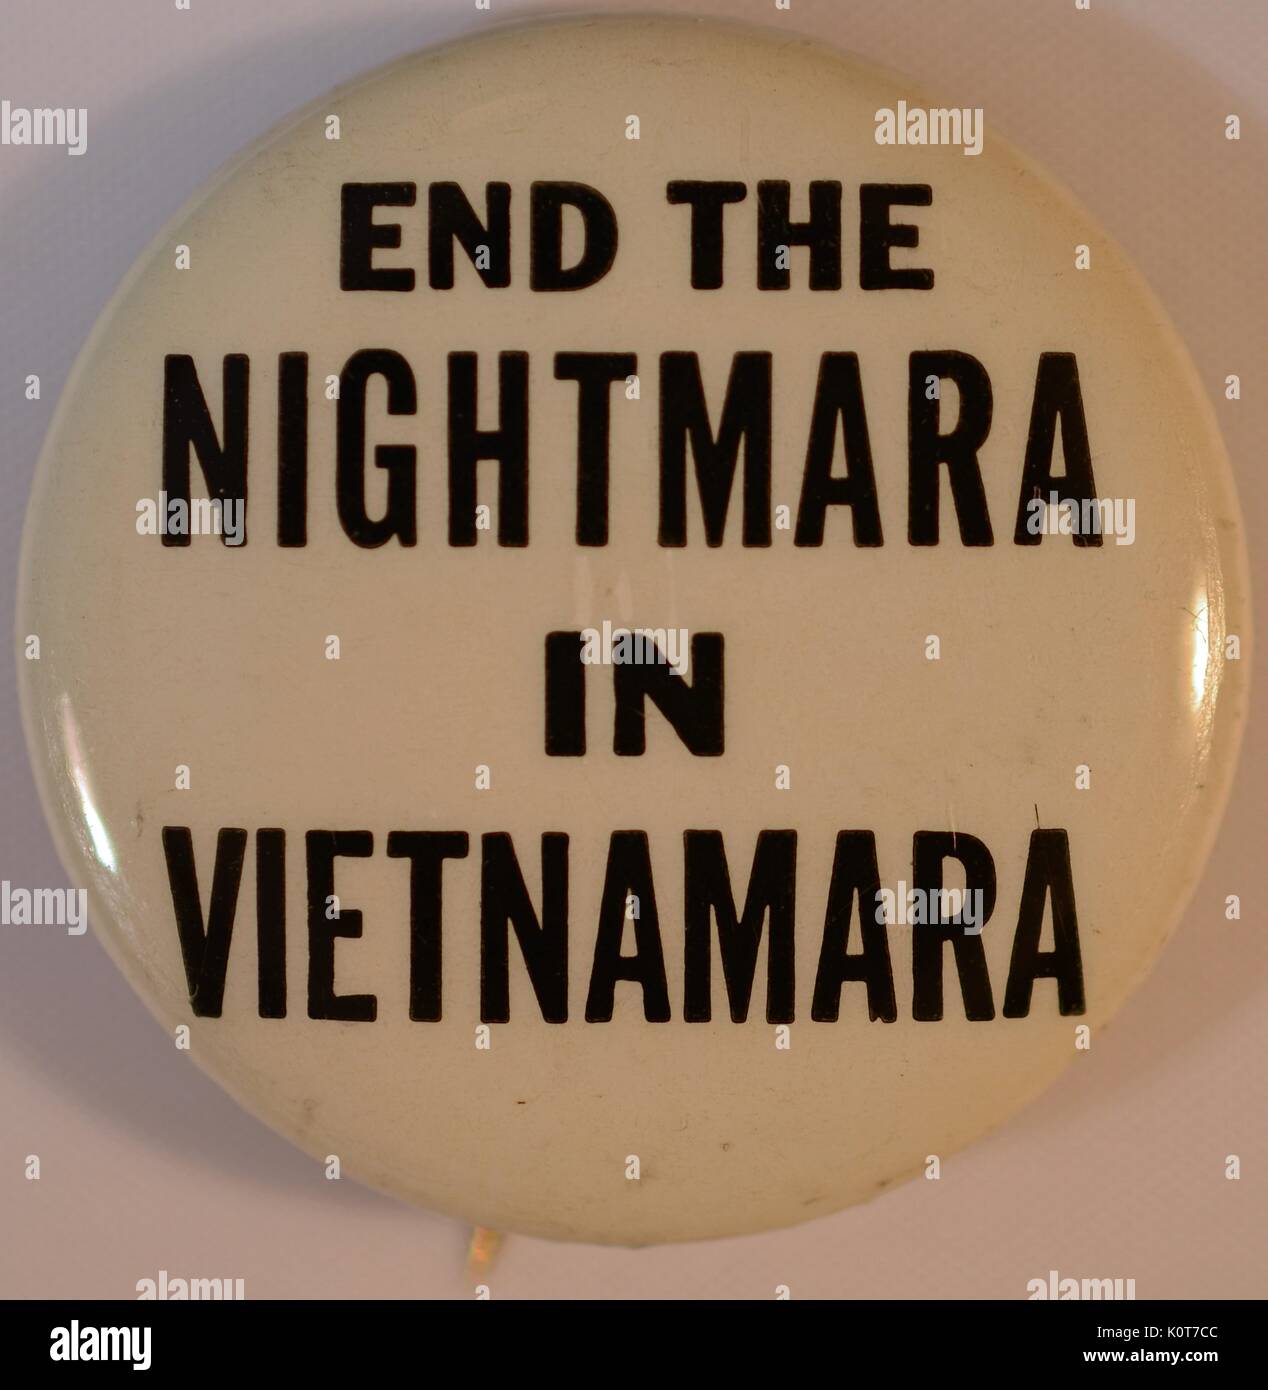 An anti-Vietnam War protest pin that reads 'End the Nightmara in Vietnamara', the wording used references then Secretary of State Robert Macnamara due to his role in escalating the United States military action in Vietnam, 1968. Stock Photo